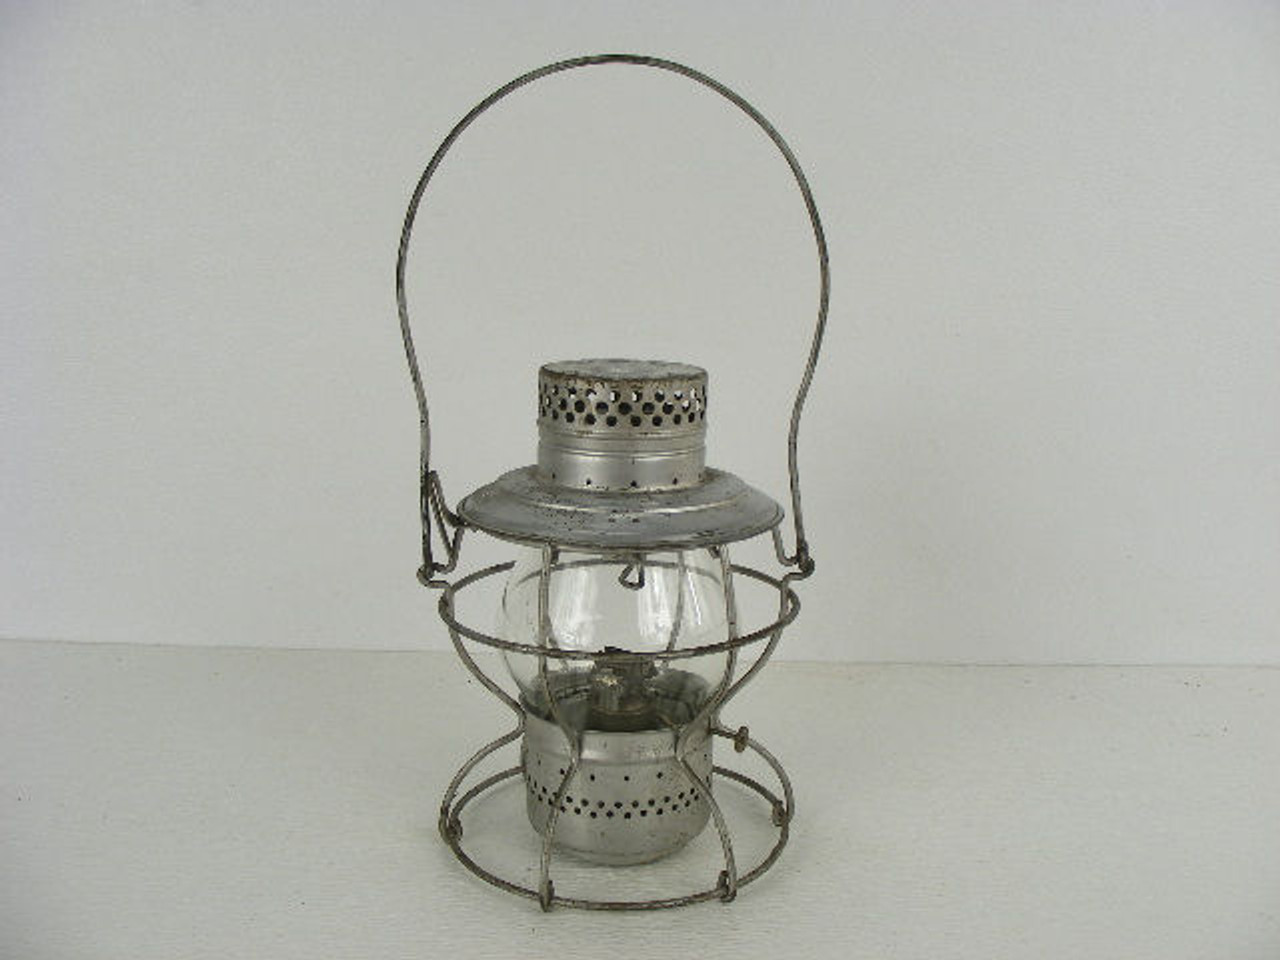 An Old Illinois Central Railroad Lantern Marked Icrr And Made By Handlan Of St Louis Antique